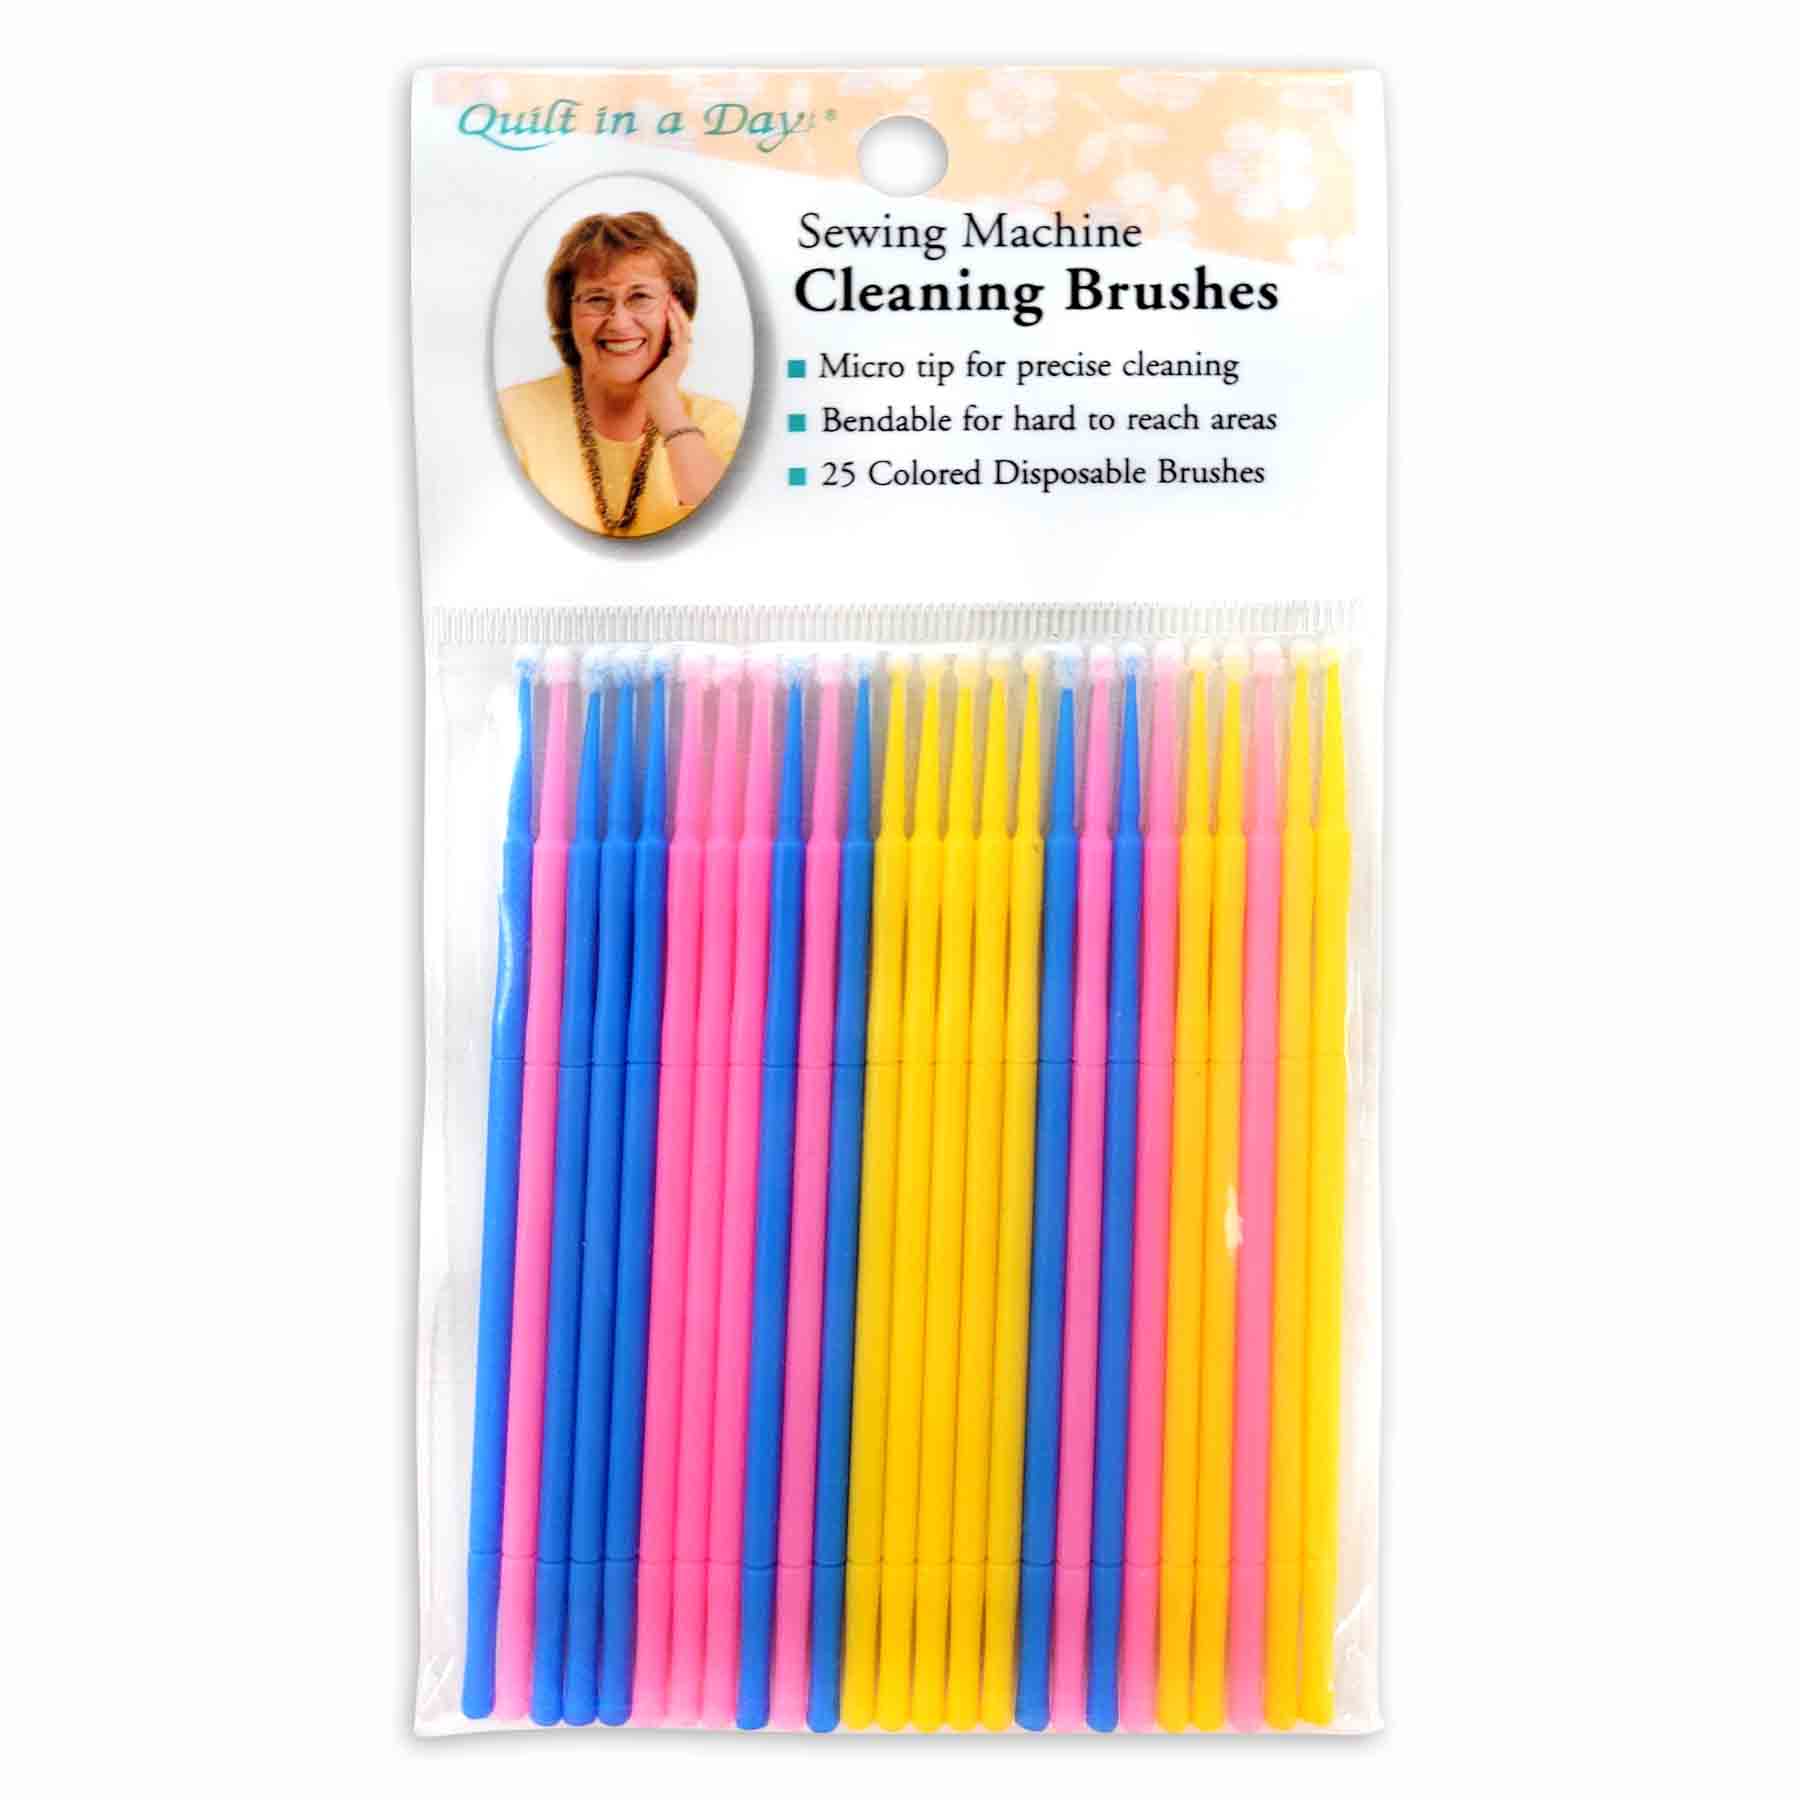 Sewing Machine Cleaning Brushes - Micro Tip